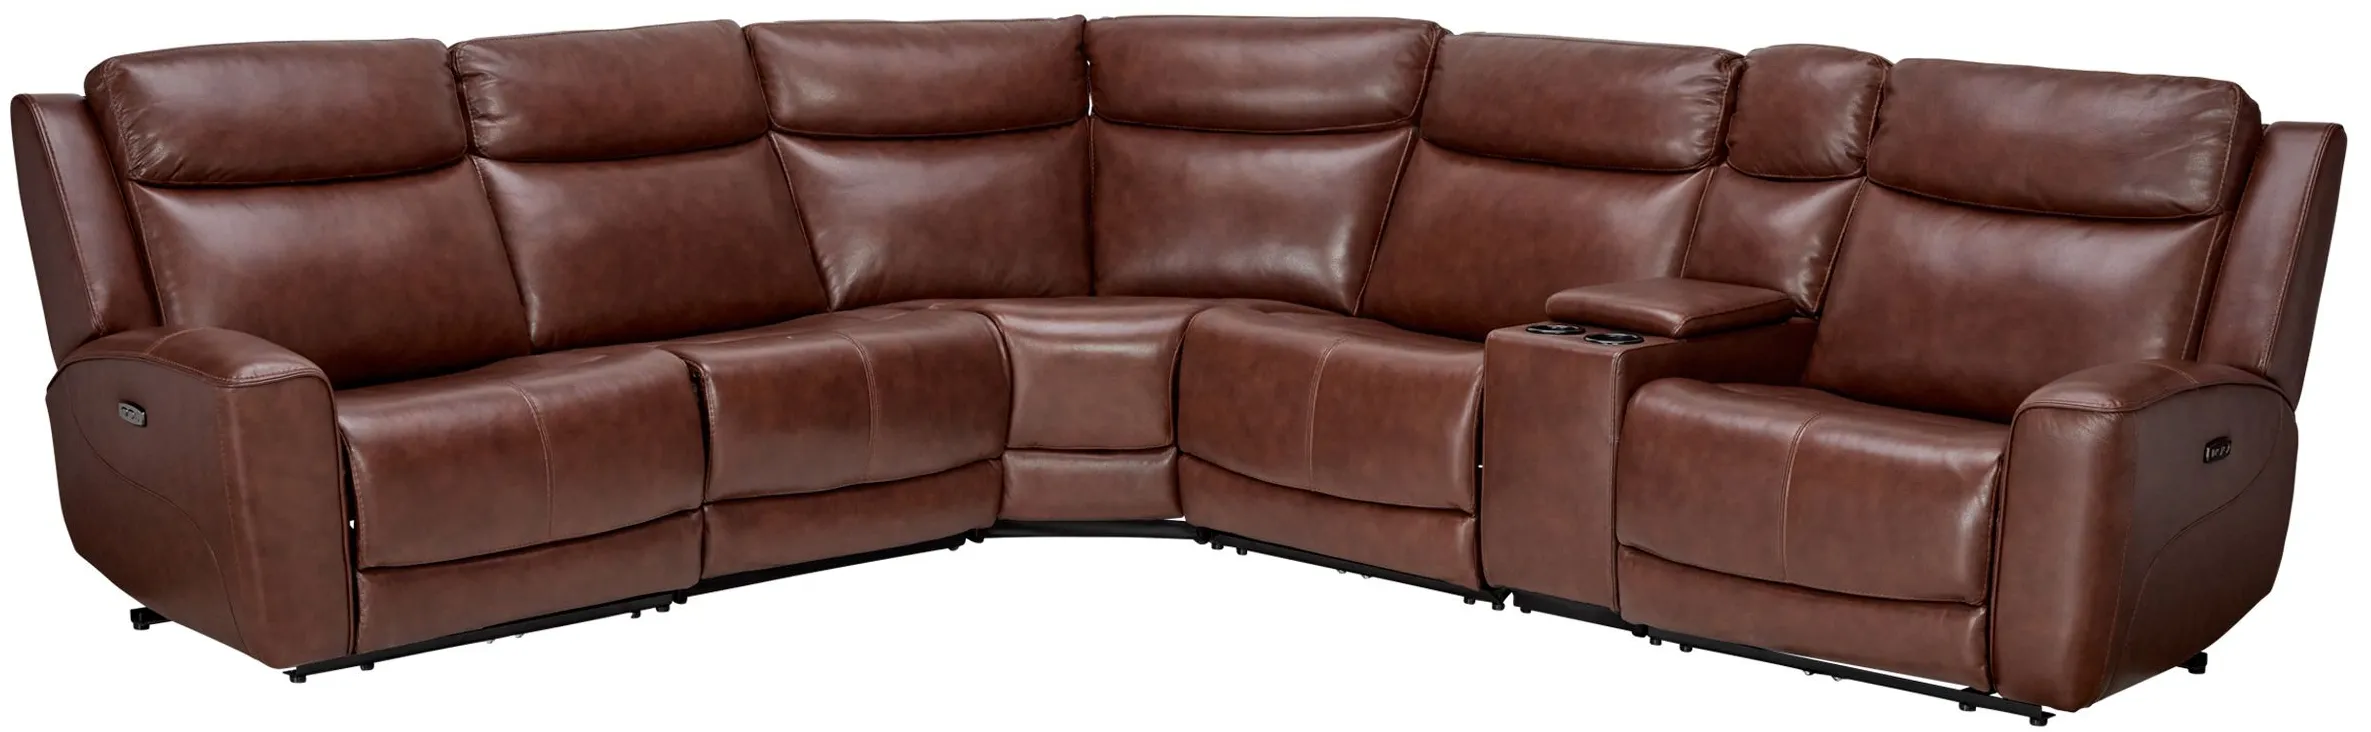 Scorpio Brown 7-Piece Leather Dual Power Reclining Sectional